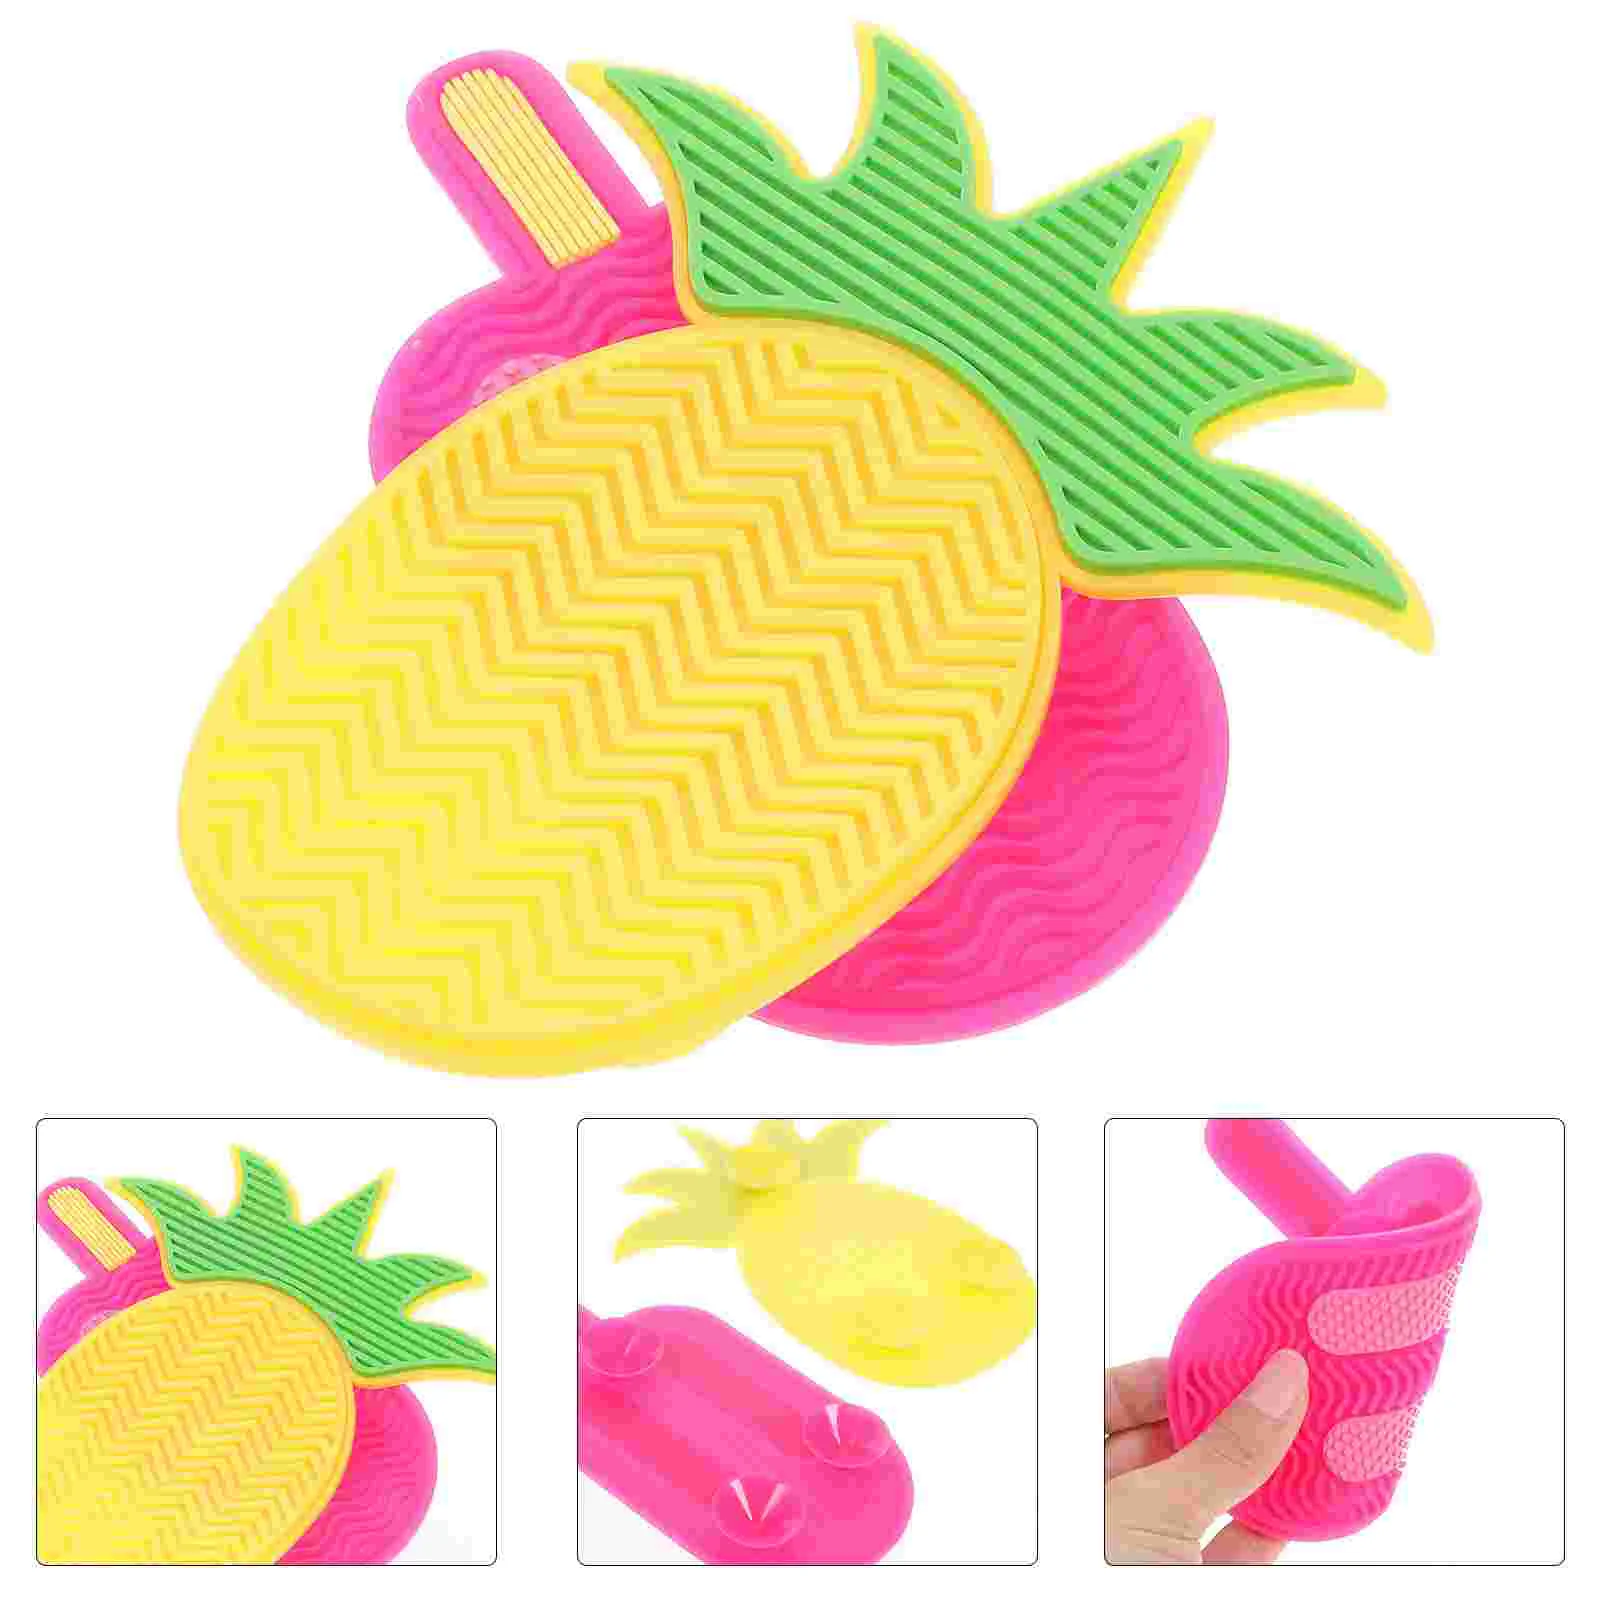 

Brush Makeup Mat Cleaner Cleaning Padscrubber Beauty Brushes Washing Silicone Suction Cup Supplies Tool Clean Tools